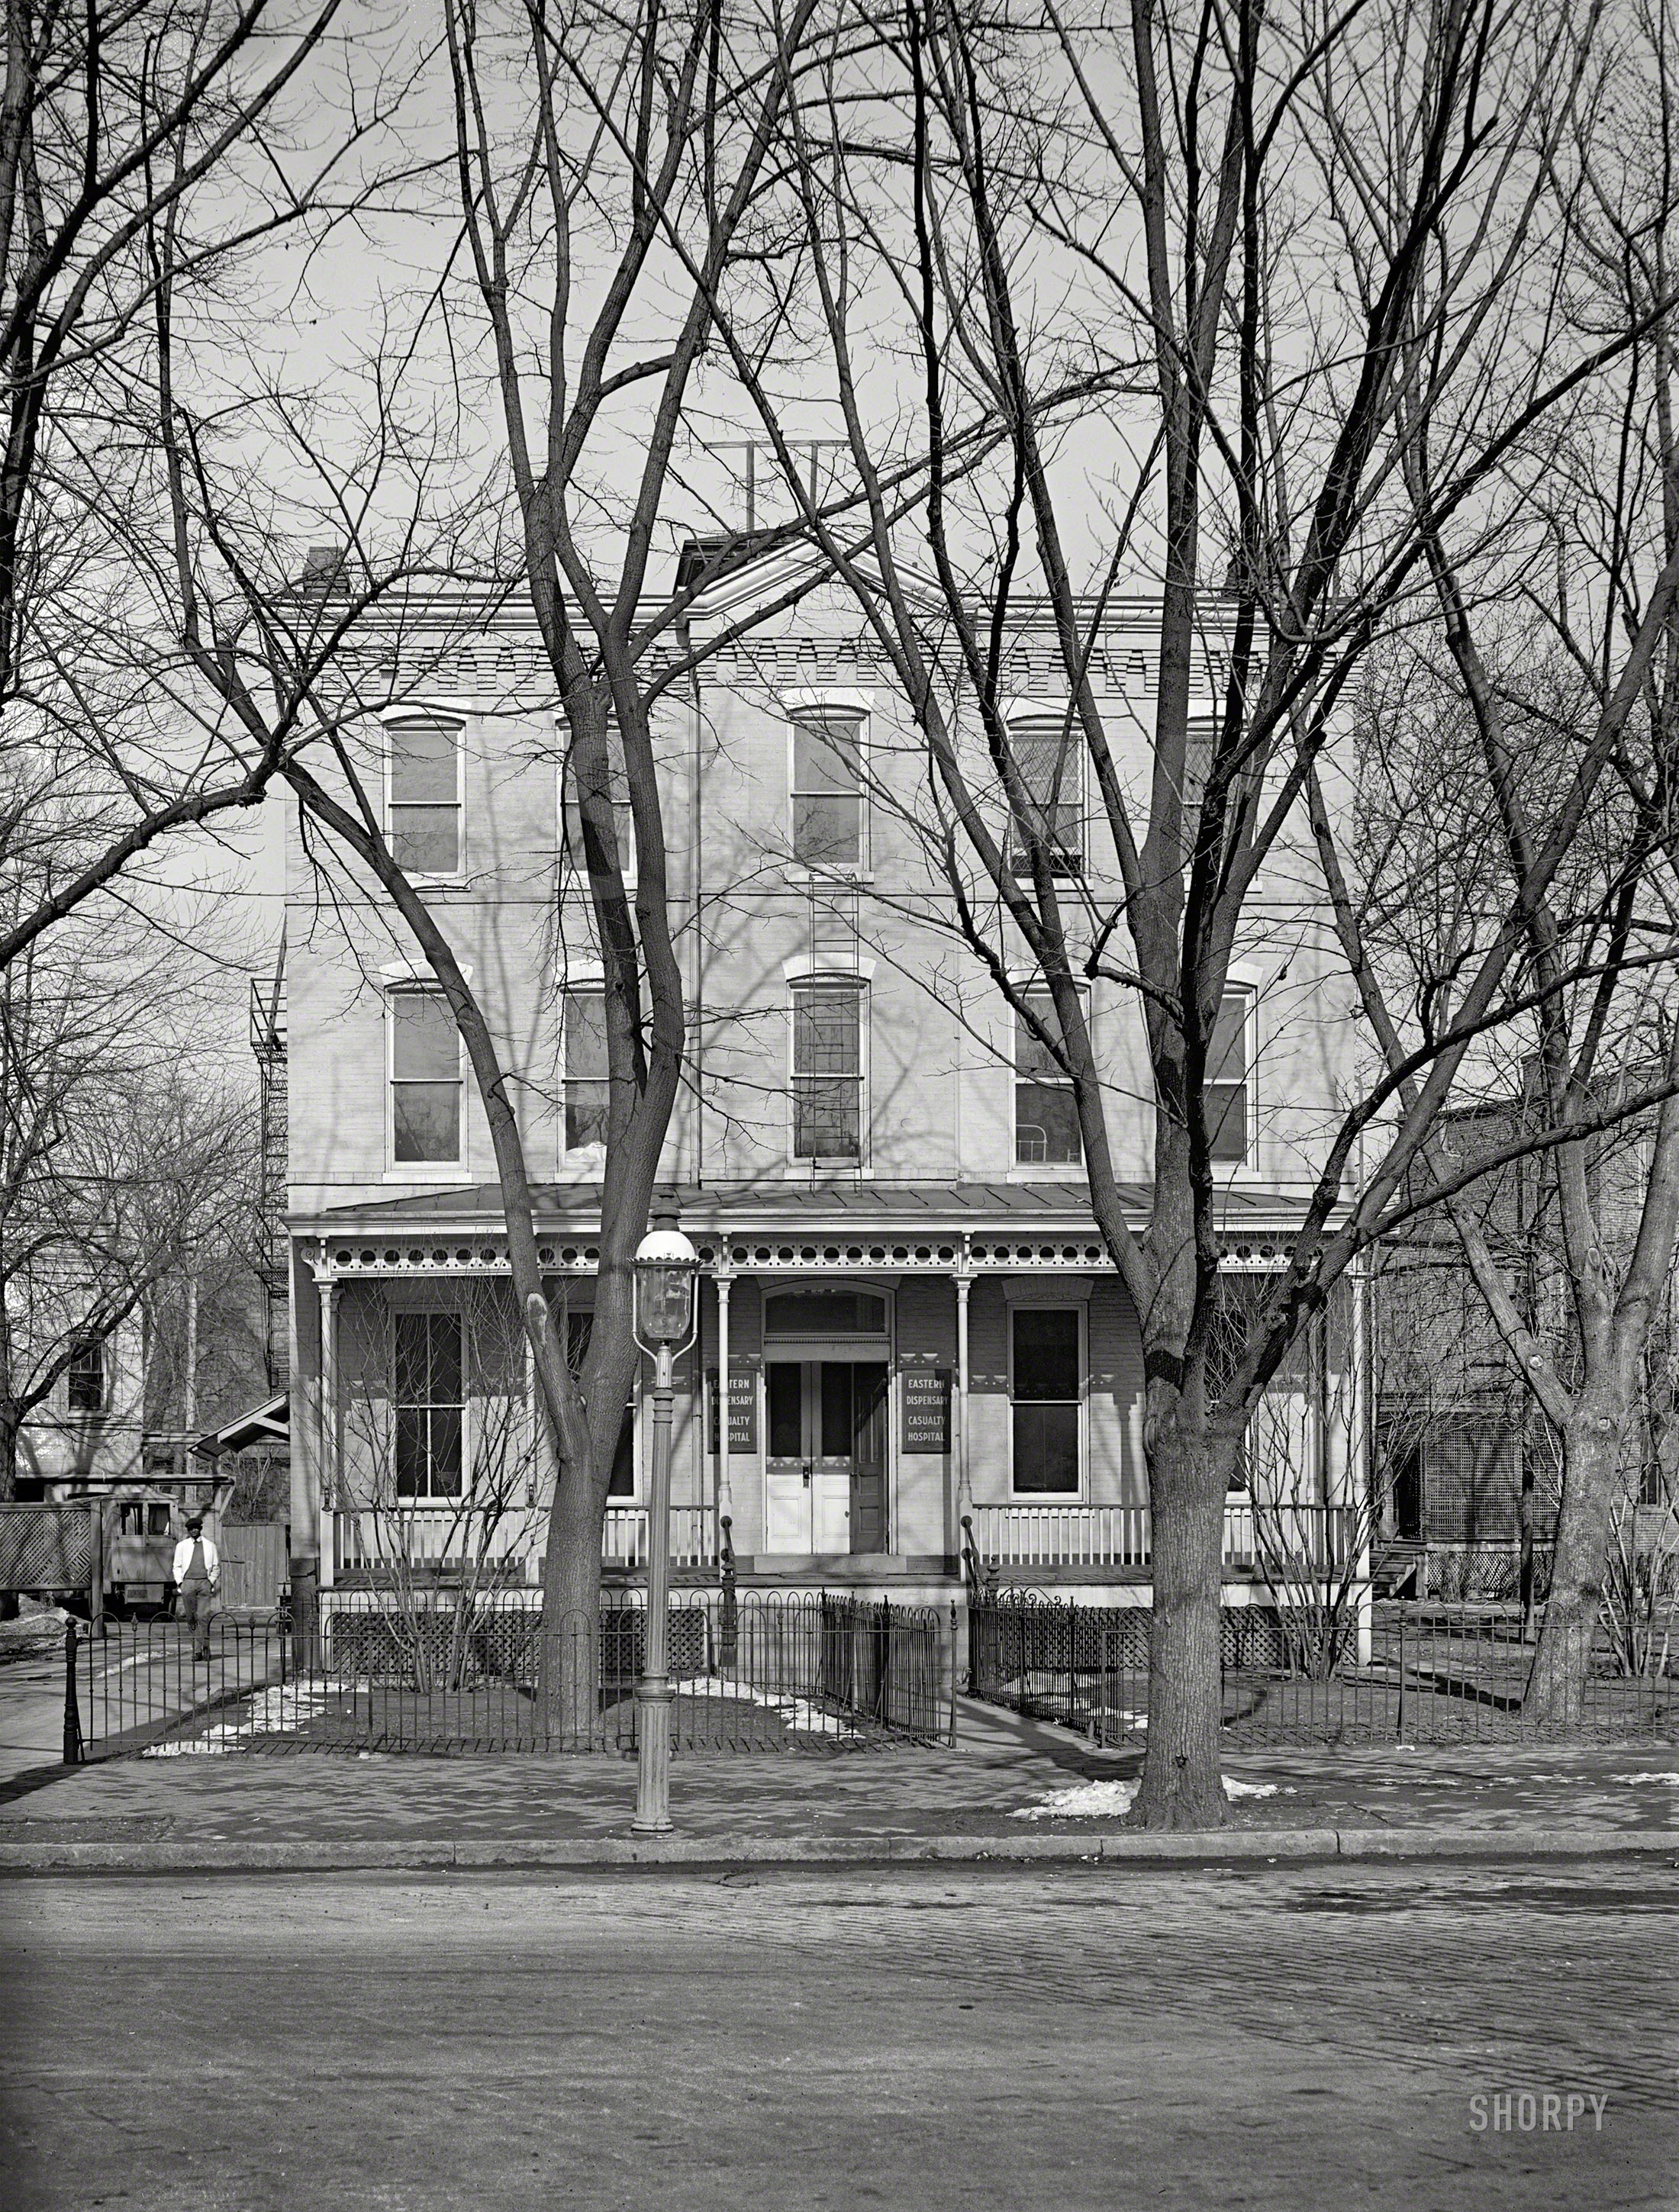 Washington, D.C., circa 1926. "Eastern Dispensary, Casualty Hospital." Where they'll fix you up good as new. National Photo Co. glass negative. View full size.